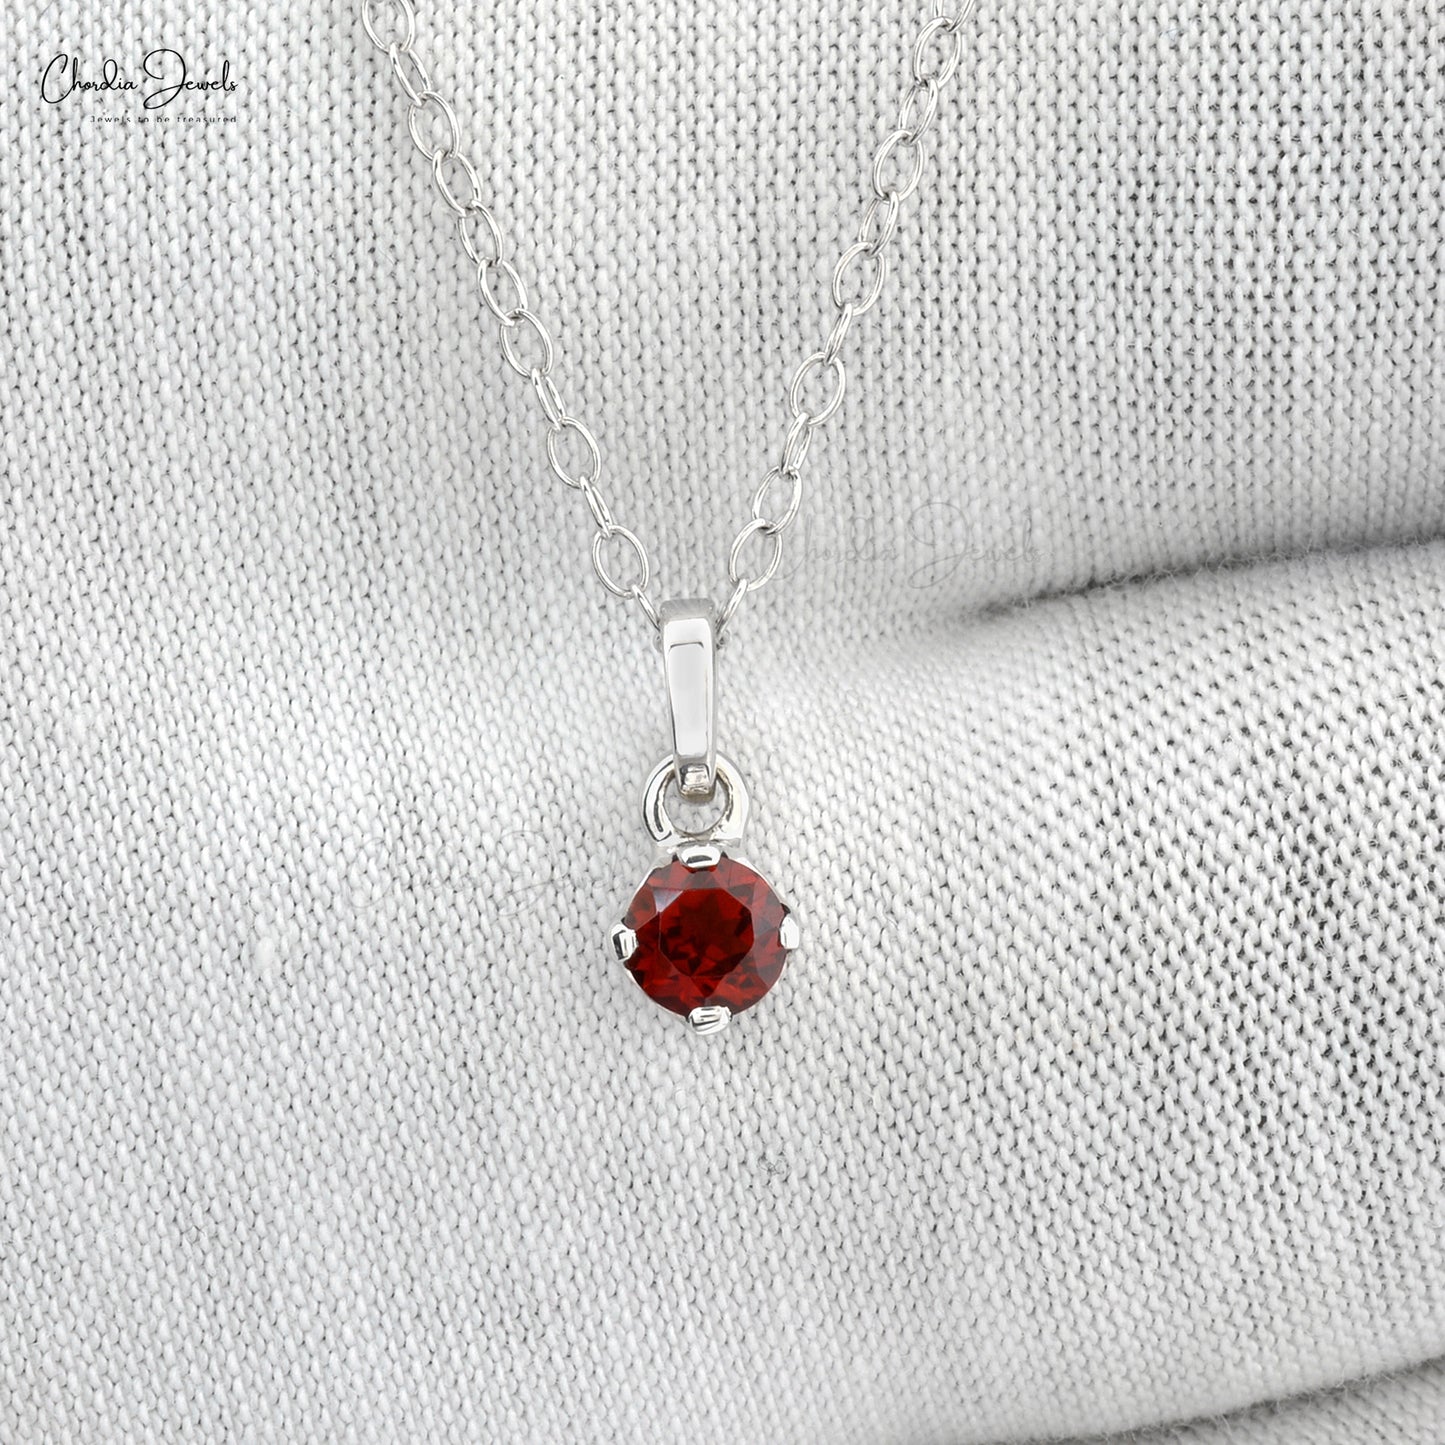 Solitaire Gemstone Pendant Necklace in 14k Real White Gold Natural Red Garnet Handmade Jewelry For Birthday Gift